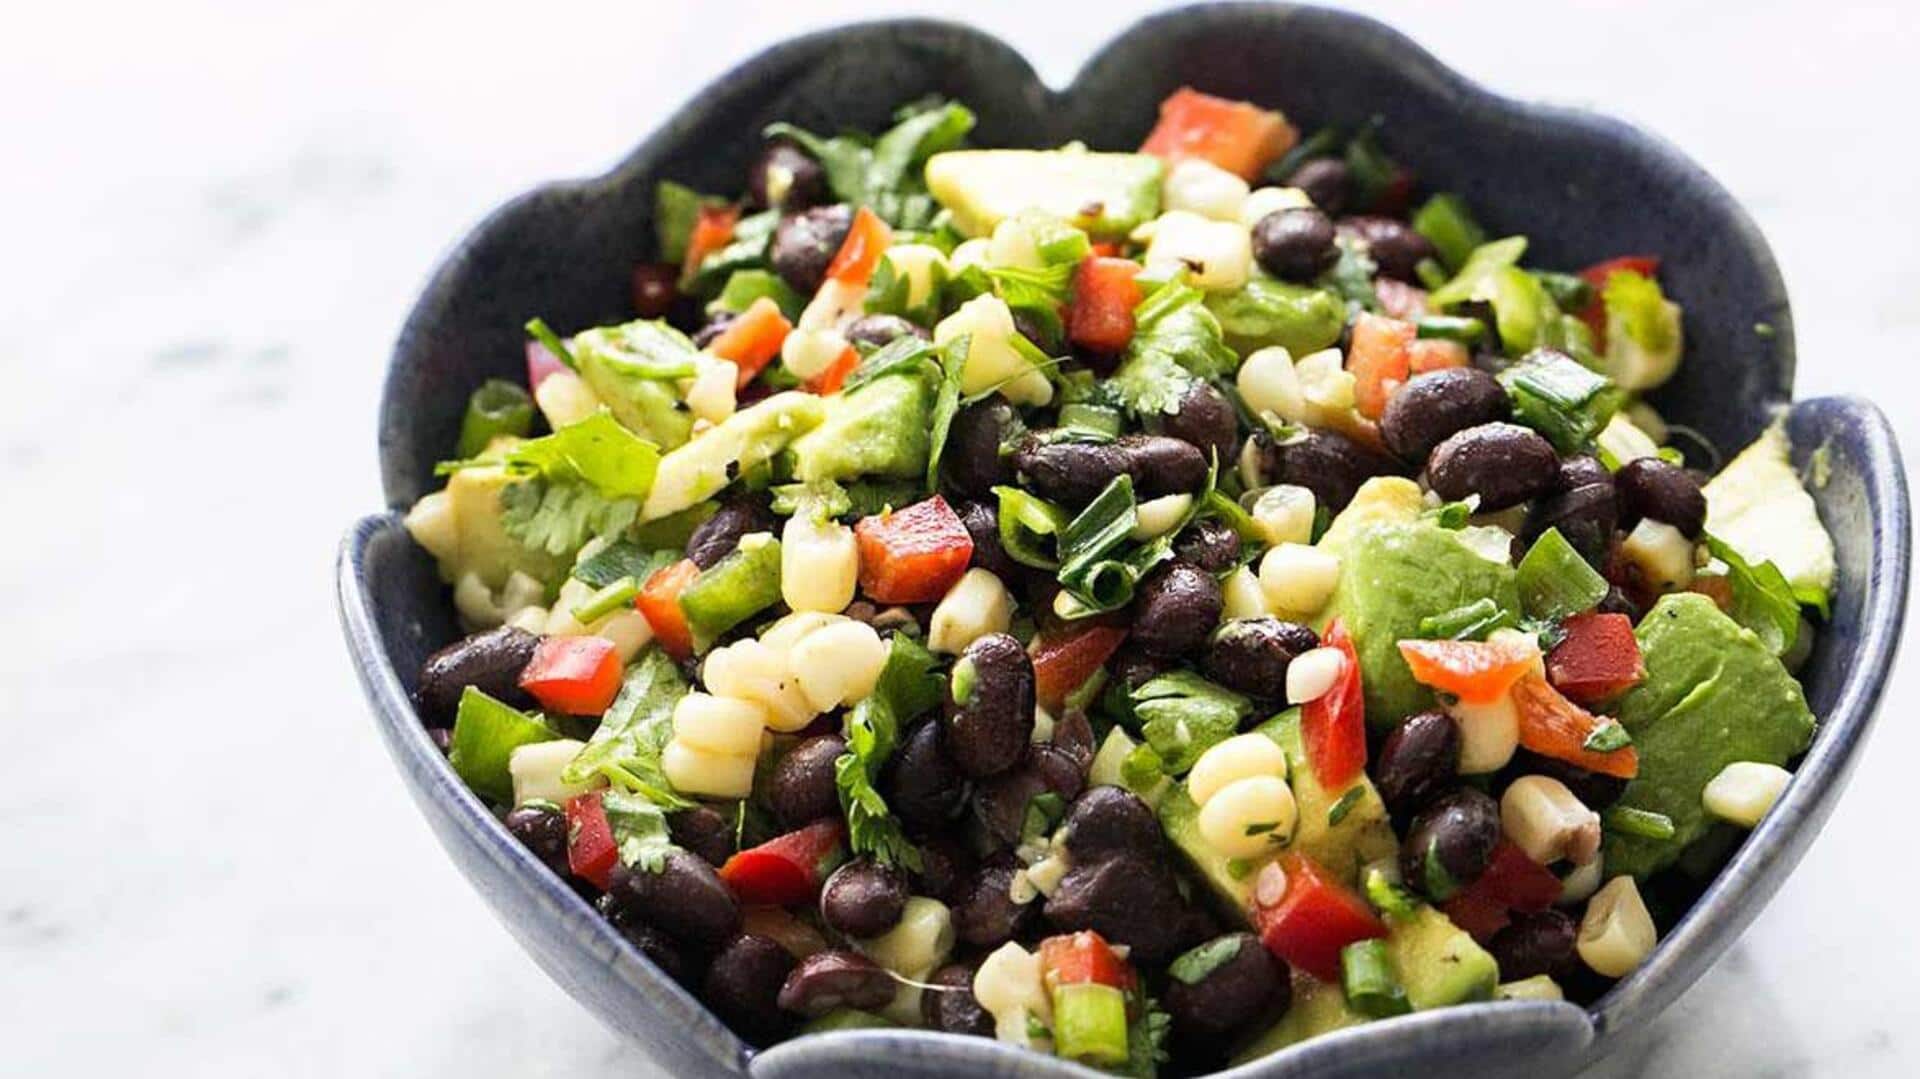 Your guests will love this Cuban black bean salad recipe